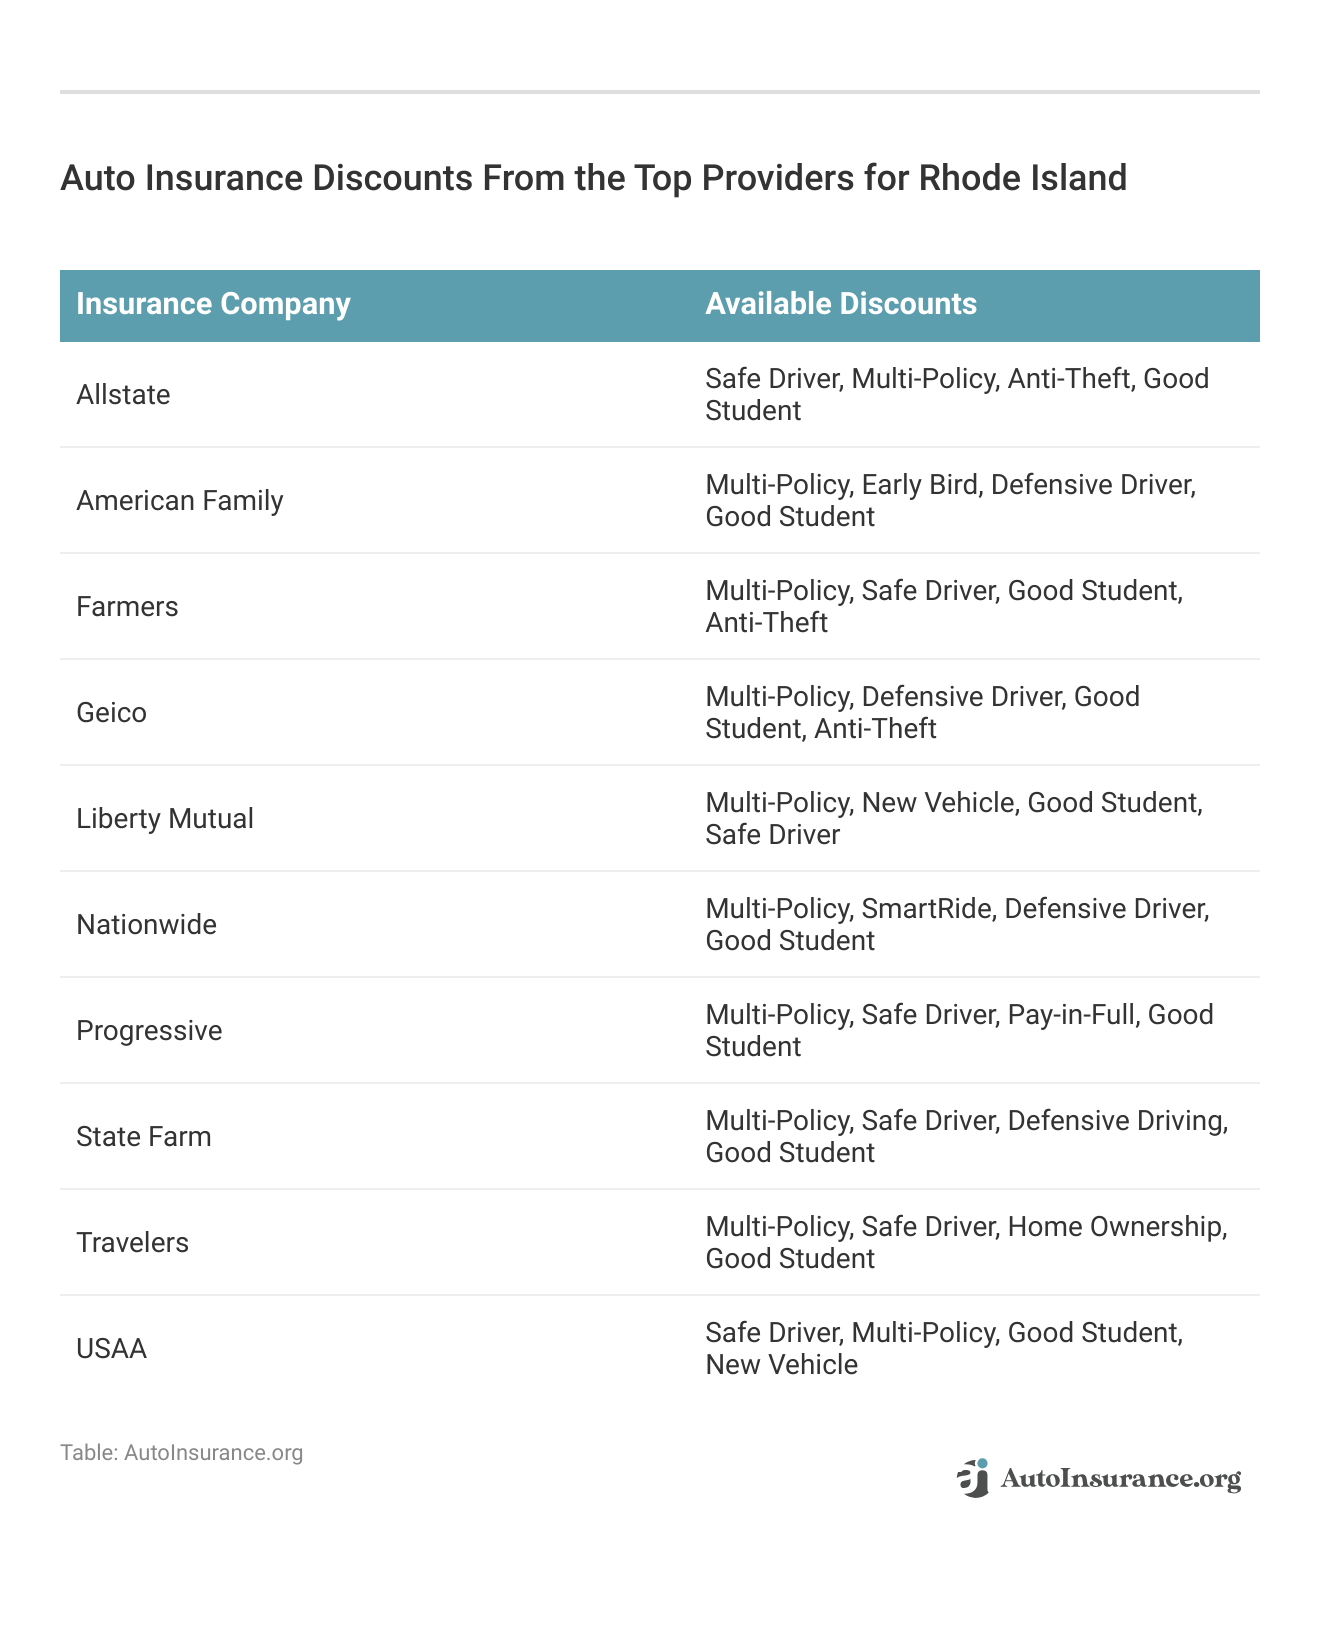 <h3>Auto Insurance Discounts From the Top Providers for Rhode Island</h3>